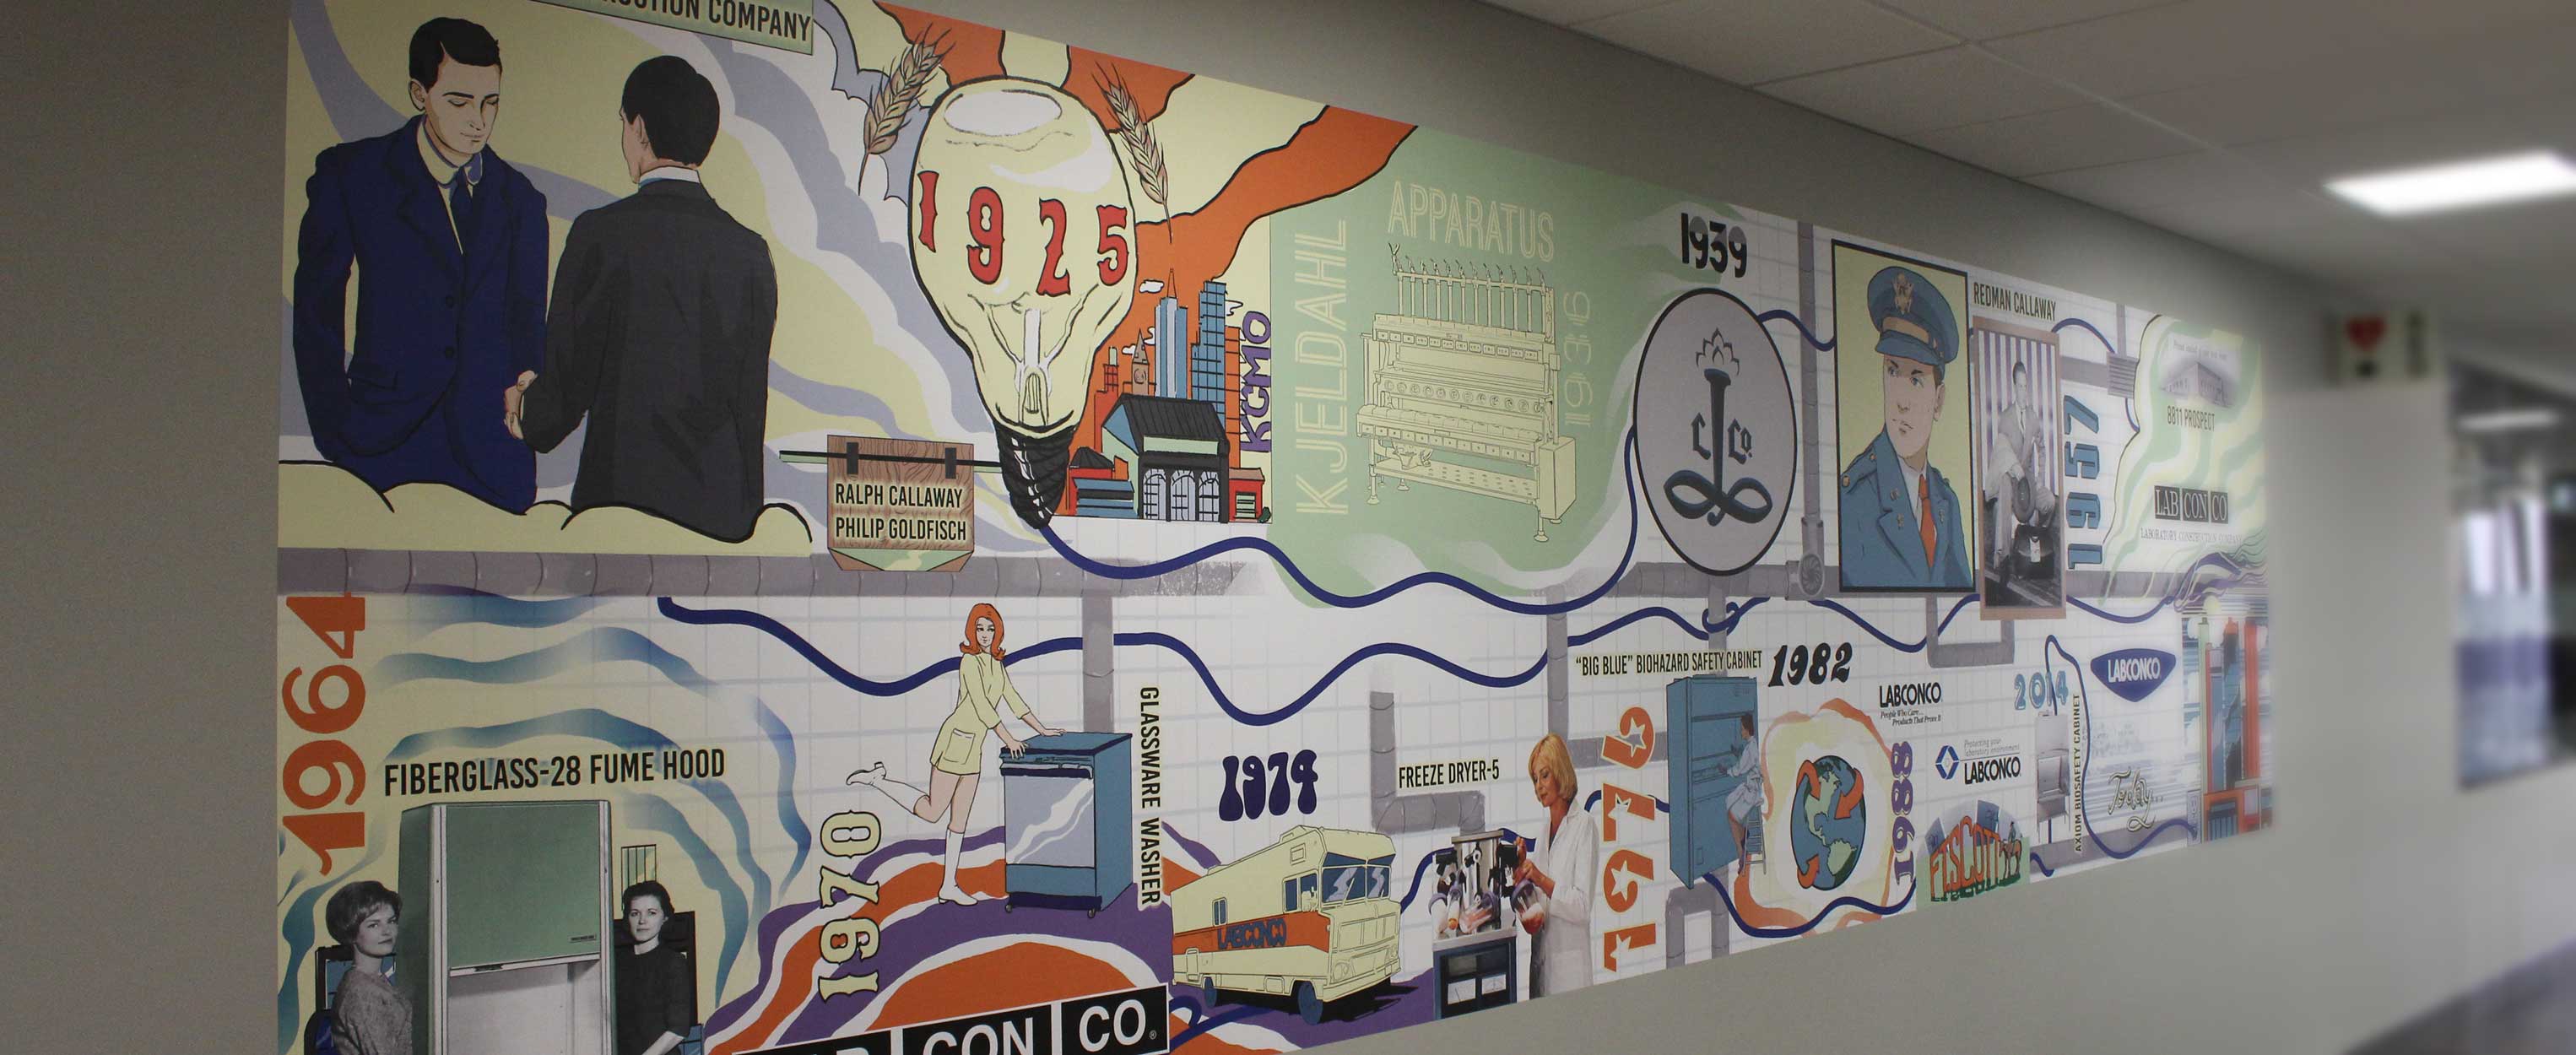 Labconco History Mural created by Jessie Green and Eien Carpenter at KCAI